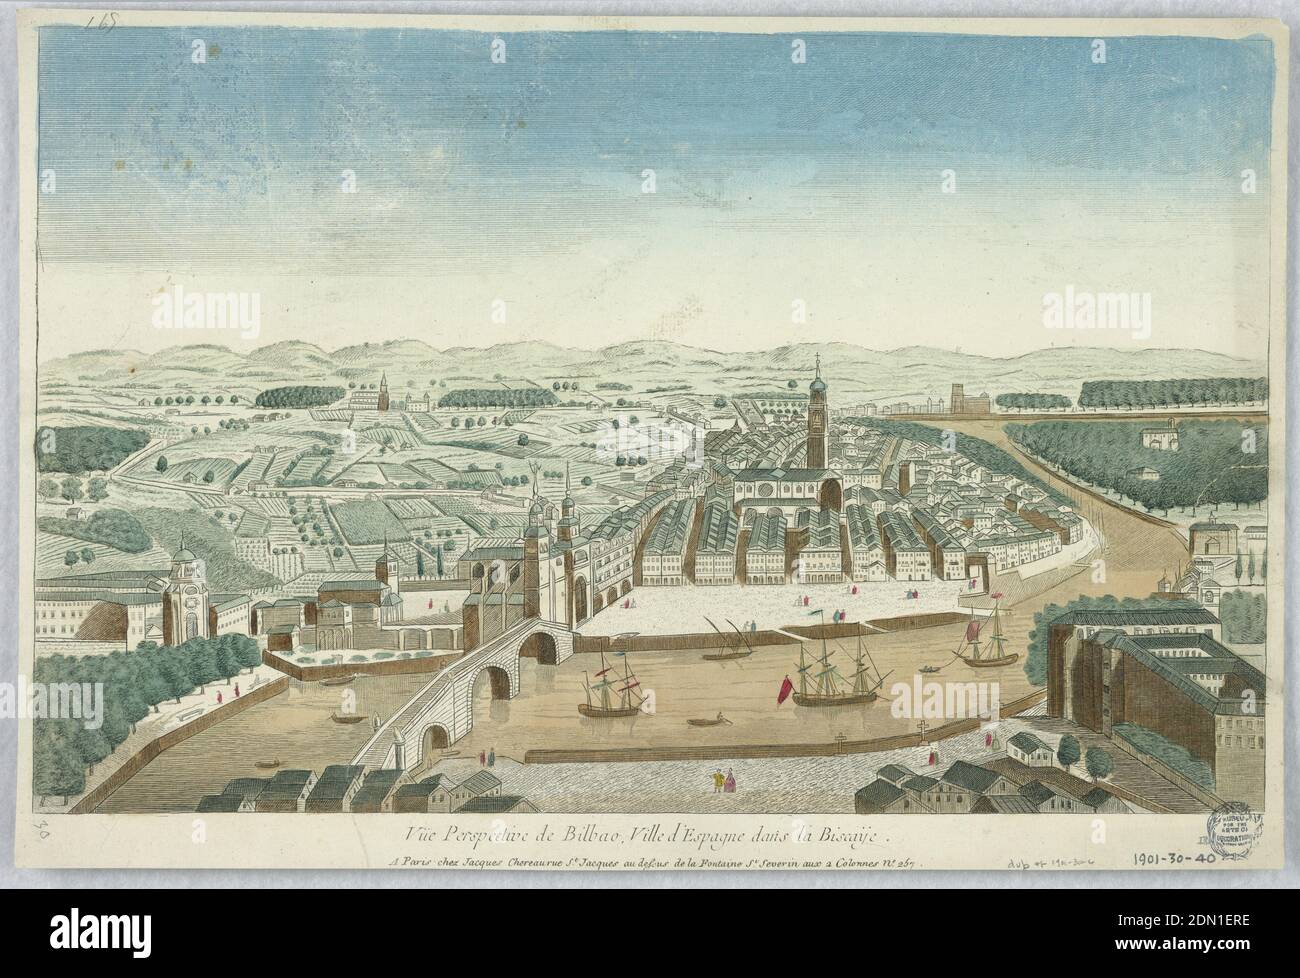 Peep-show, Vuë Perspective de Bilbao, Ville d'Espagne dans la Biscaye, Engraving in ink with washes of watercolor on paper, mounted on scrapbook page, Peep-show print, France, ca. 1750, Print Stock Photo